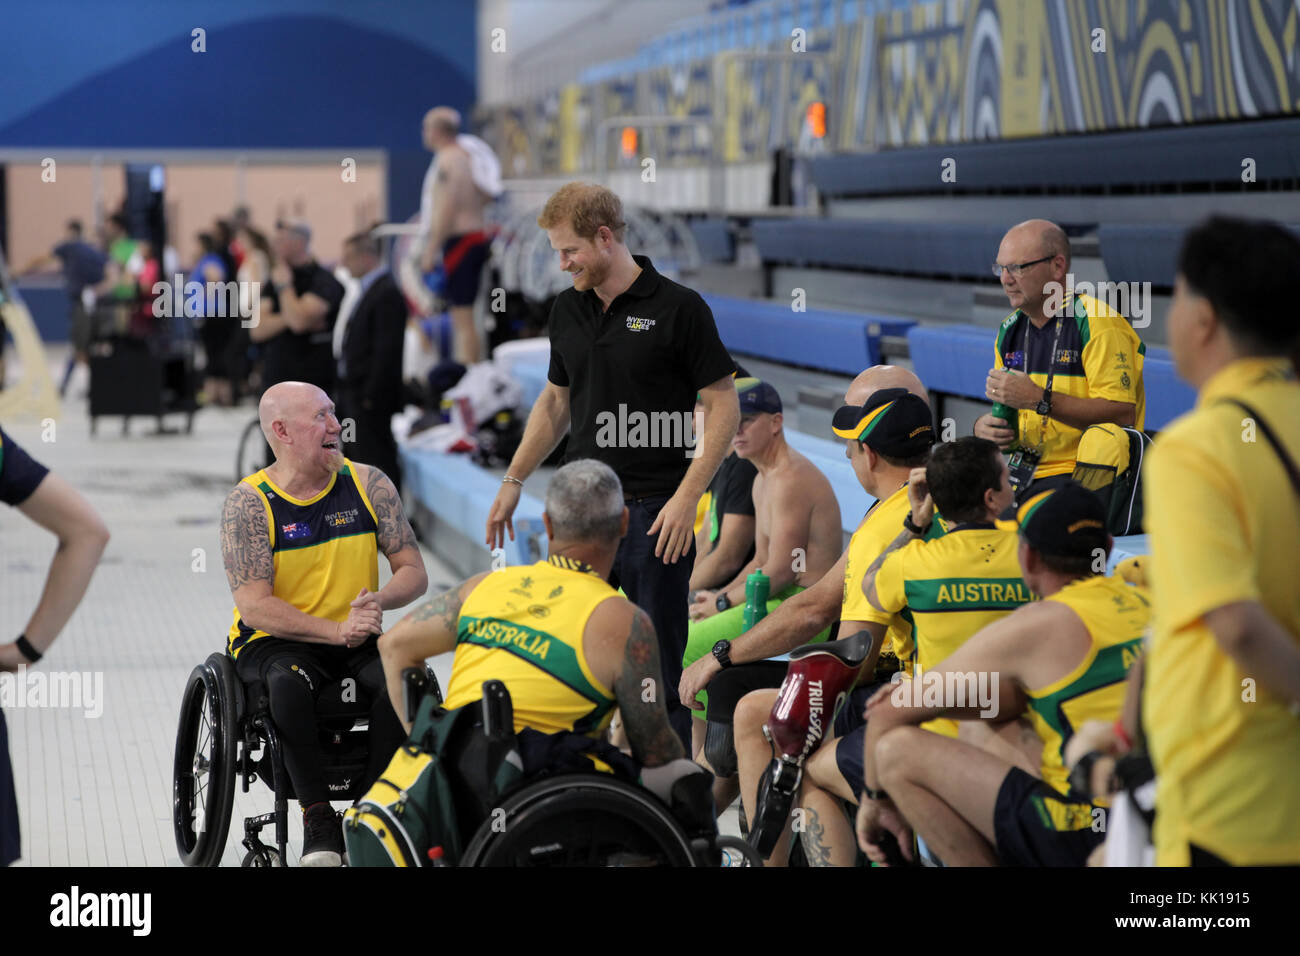 United Kingdom Prince Harry of Wales meets with athletes competing in the Invictus Games at the Toronto Pan Am Sports Centre September 22, 2017 in Toronto, Canada. The Invictus Games is an international Paralympic-style event for injured or sick military personnel and veterans. (photo by Daniel Luksan  via Planetpix) Stock Photo